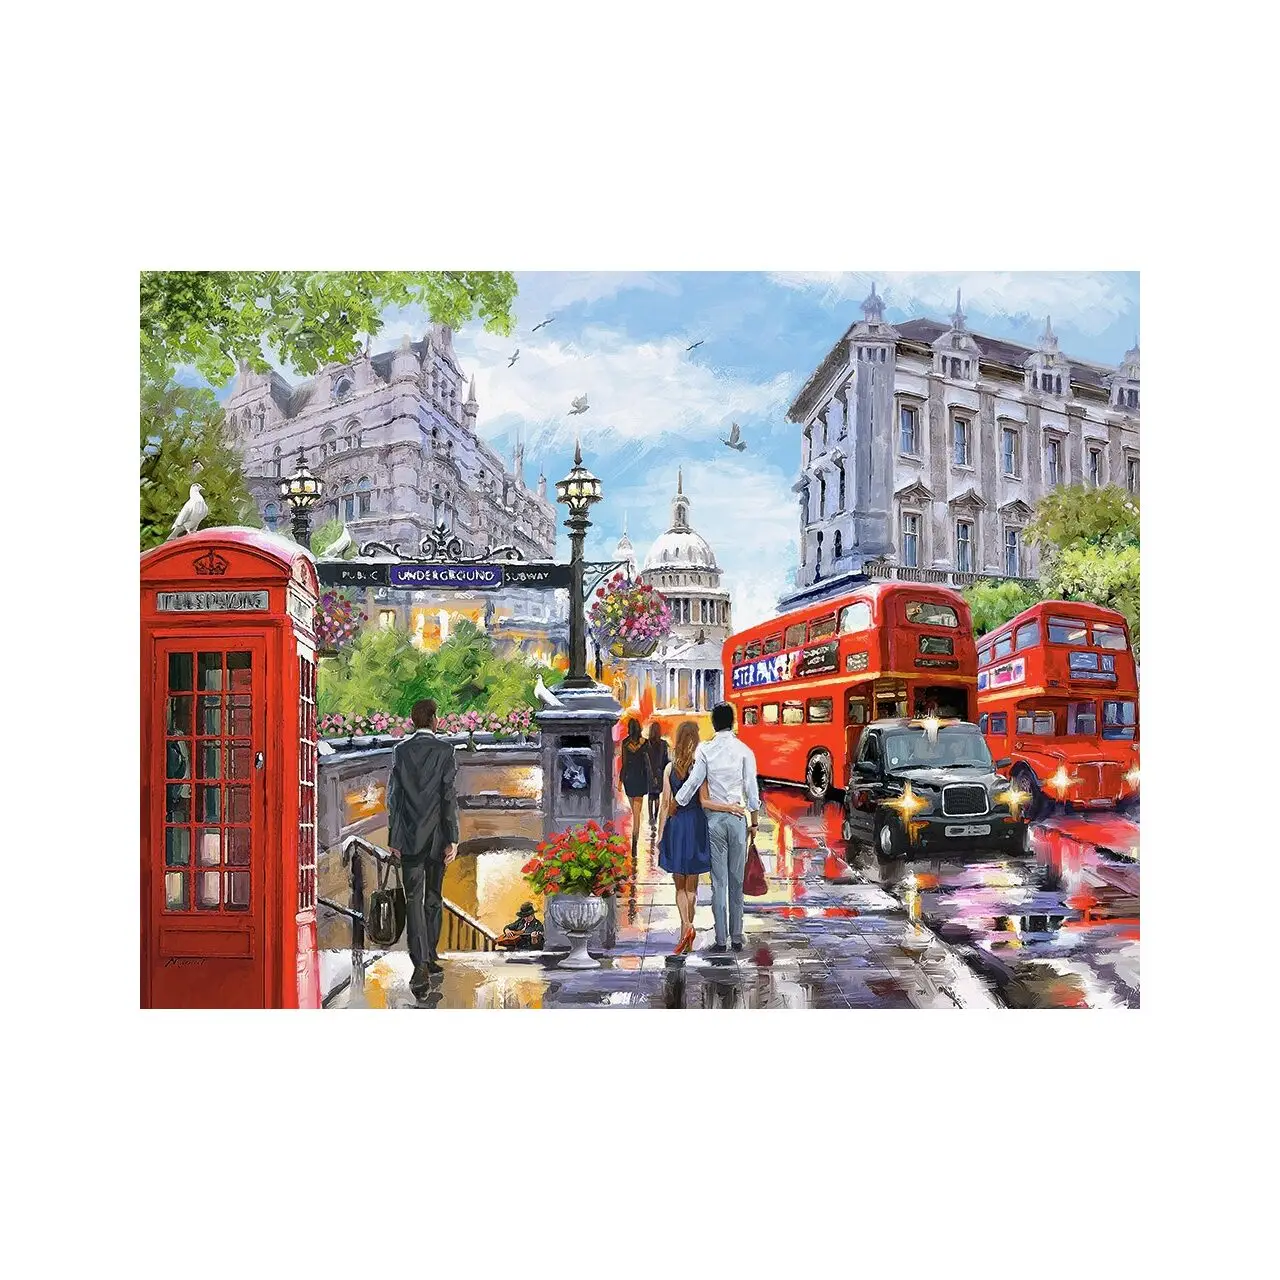 Puzzle Fr眉hling in London 2000 Teile